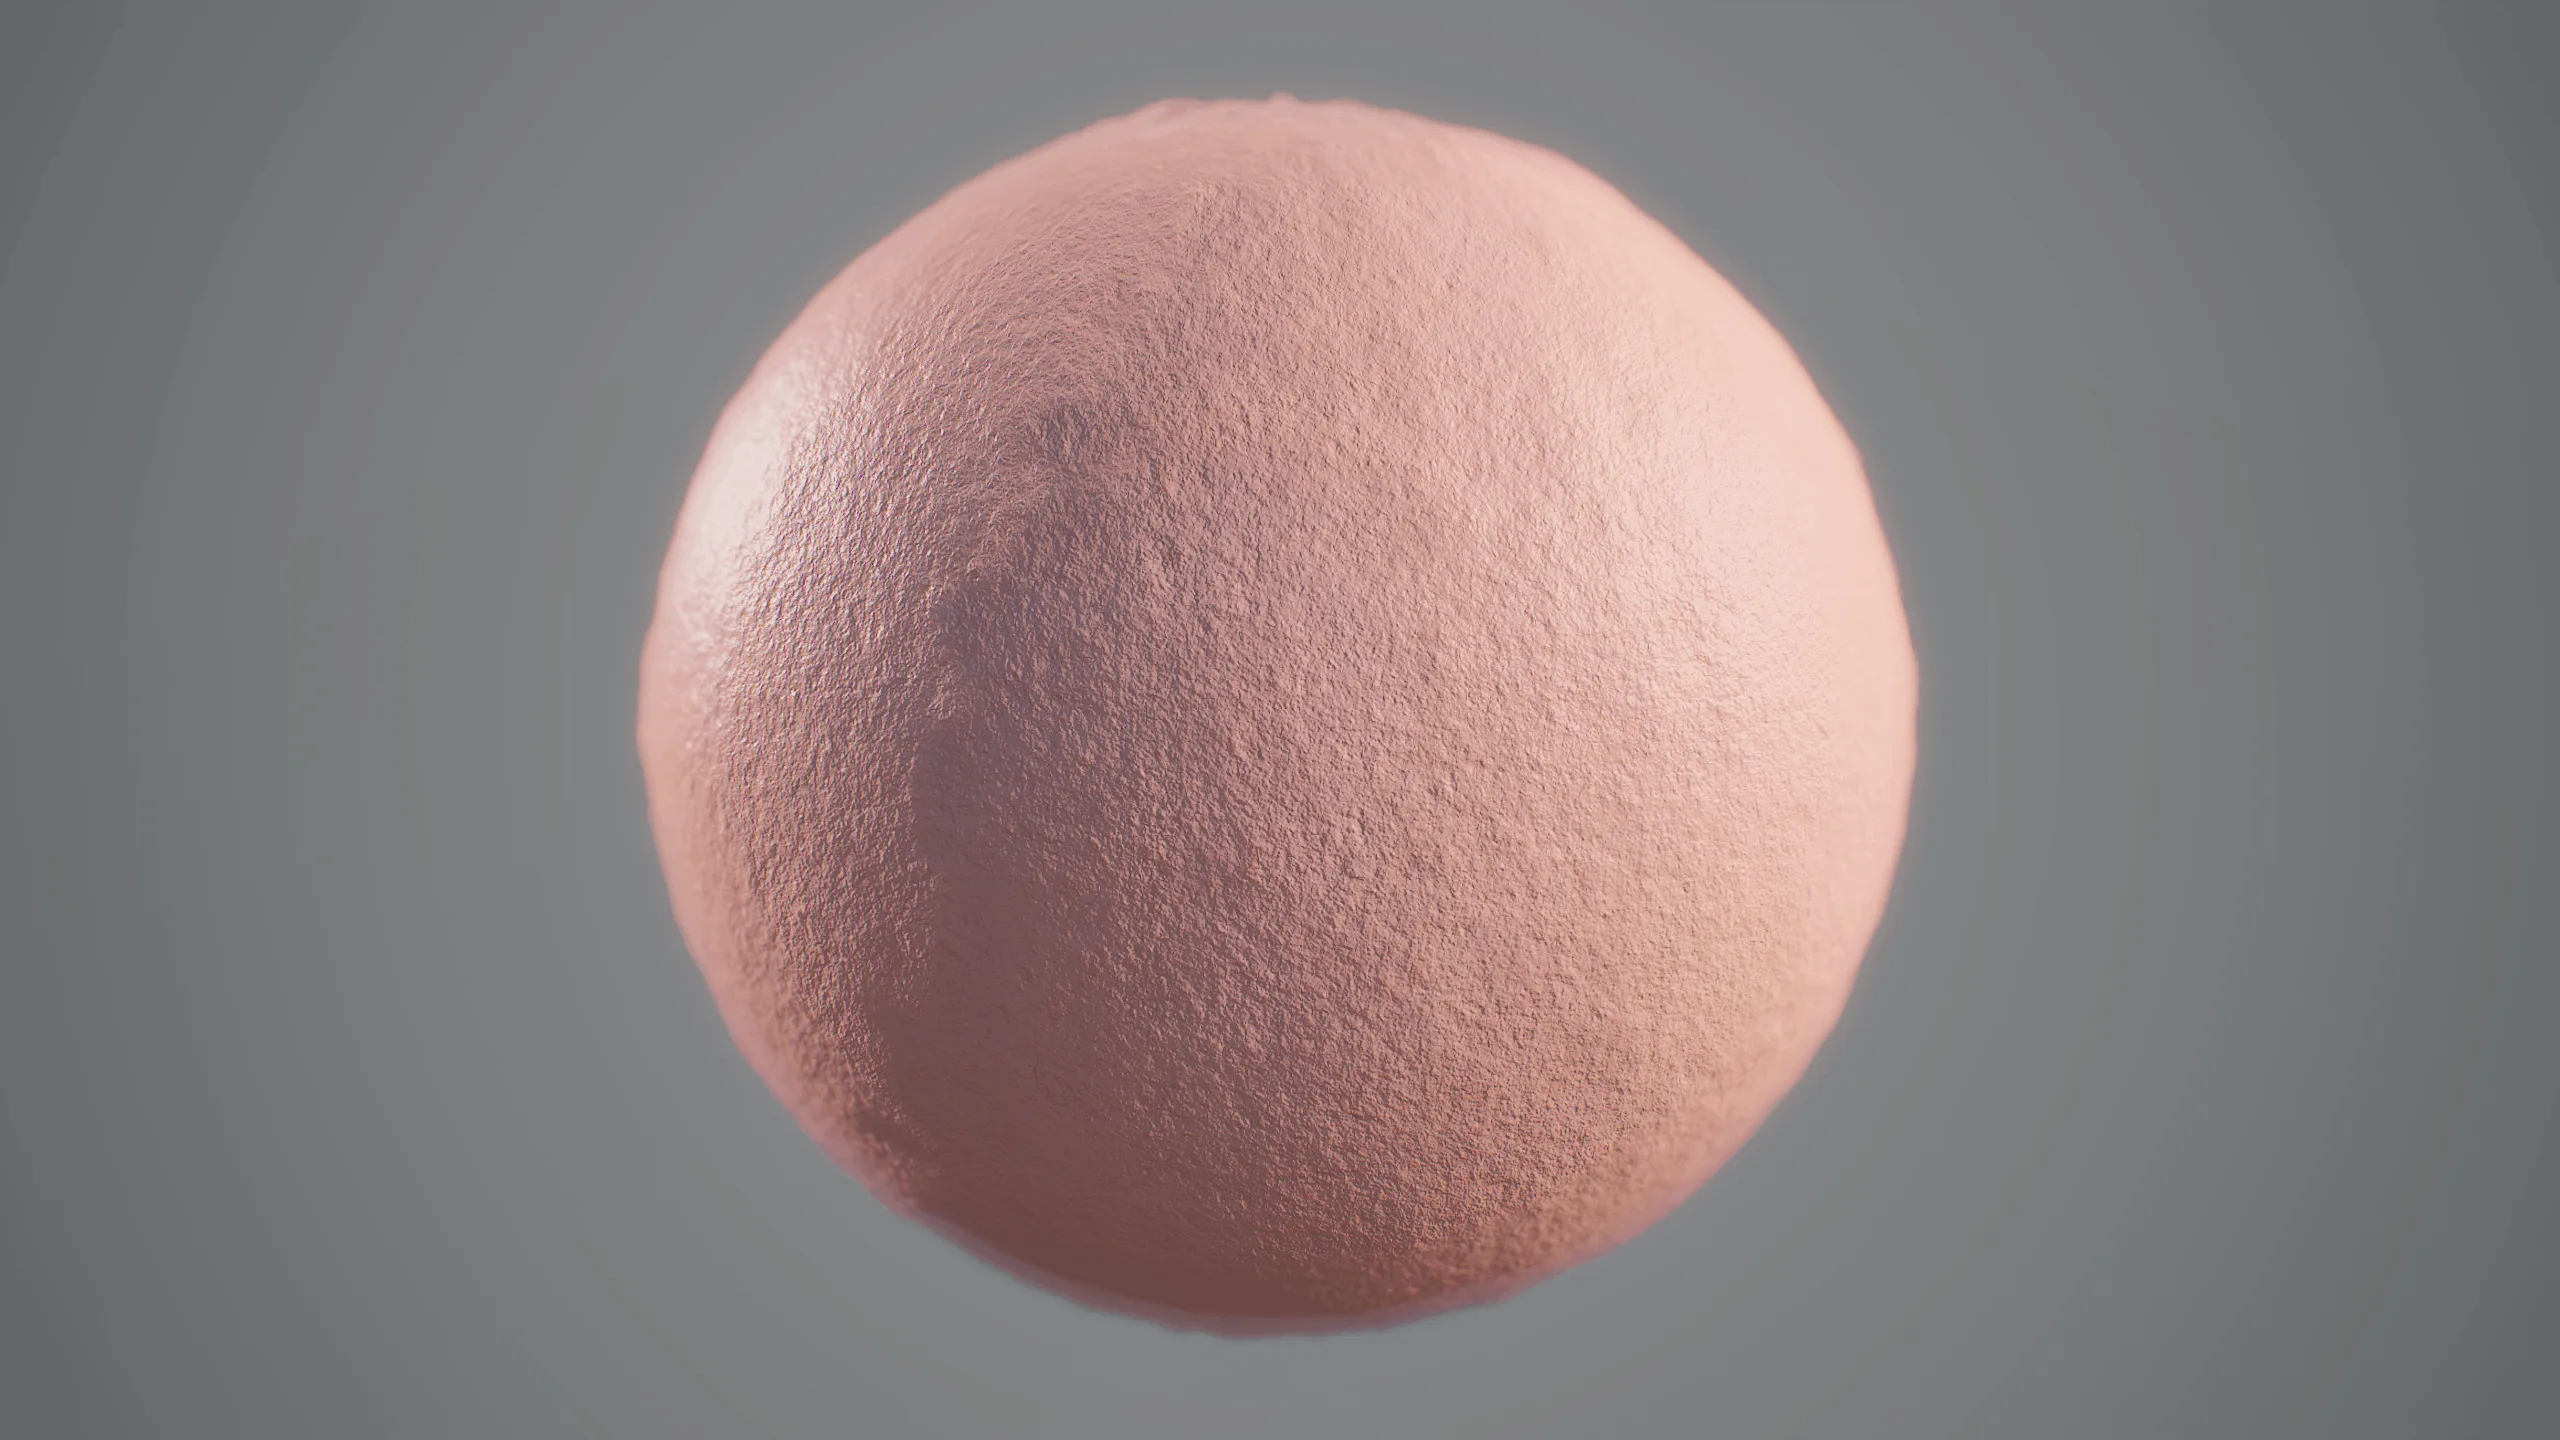 Texture Stylized Skin Material